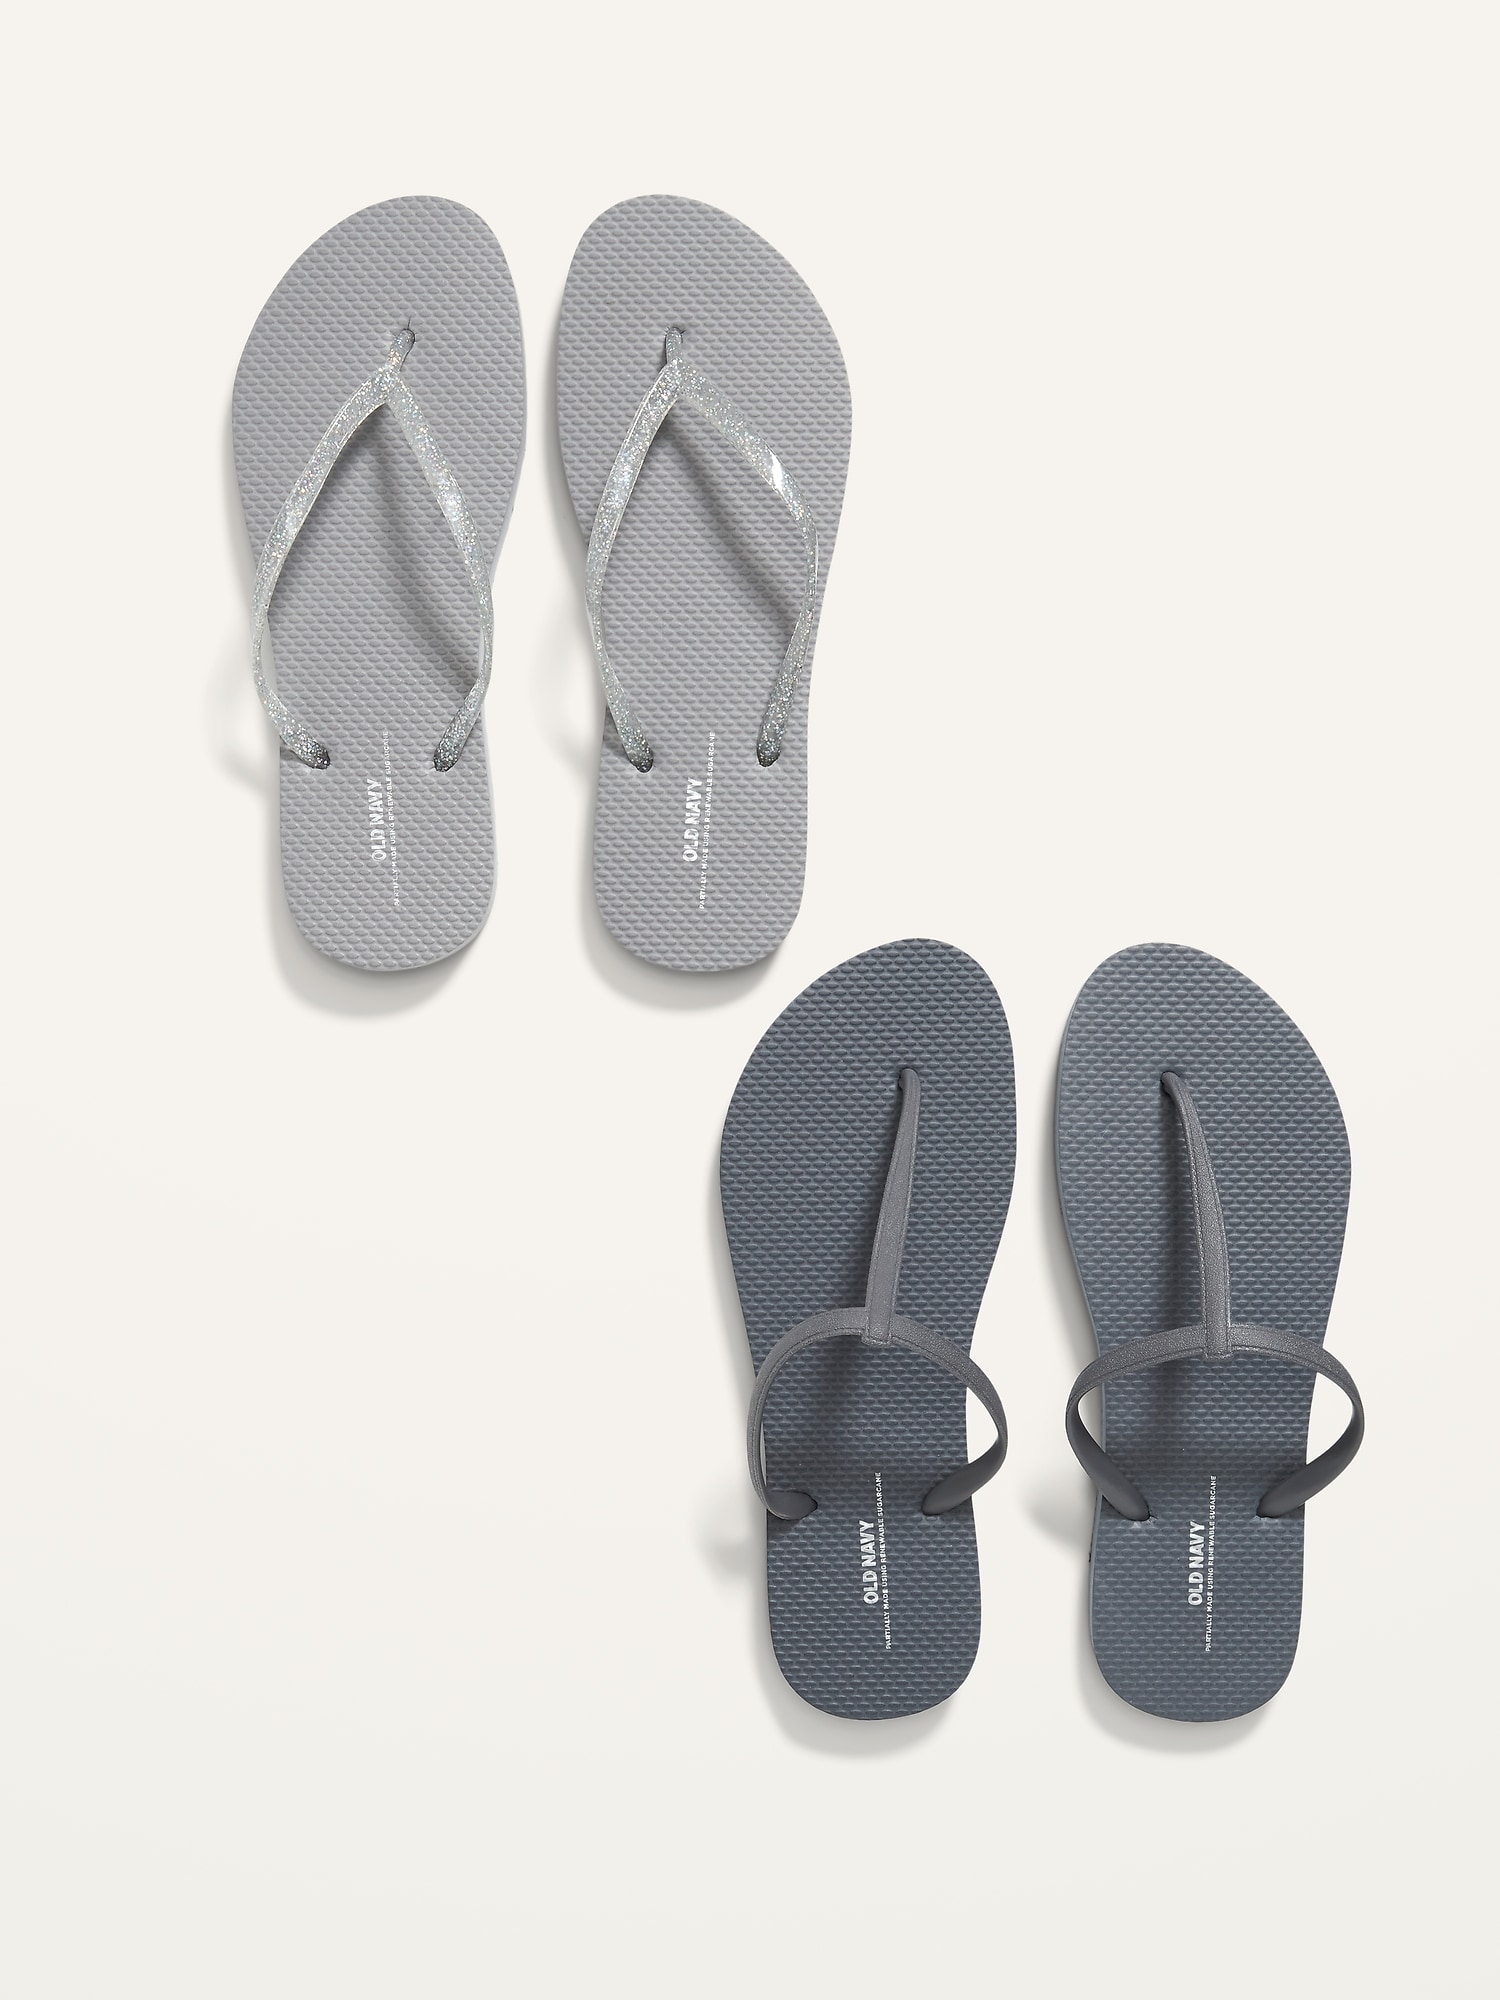 Old Navy Flip-Flop/T-Strap Sandals Variety 2-Pack (Partially Plant-Based) gray. 1